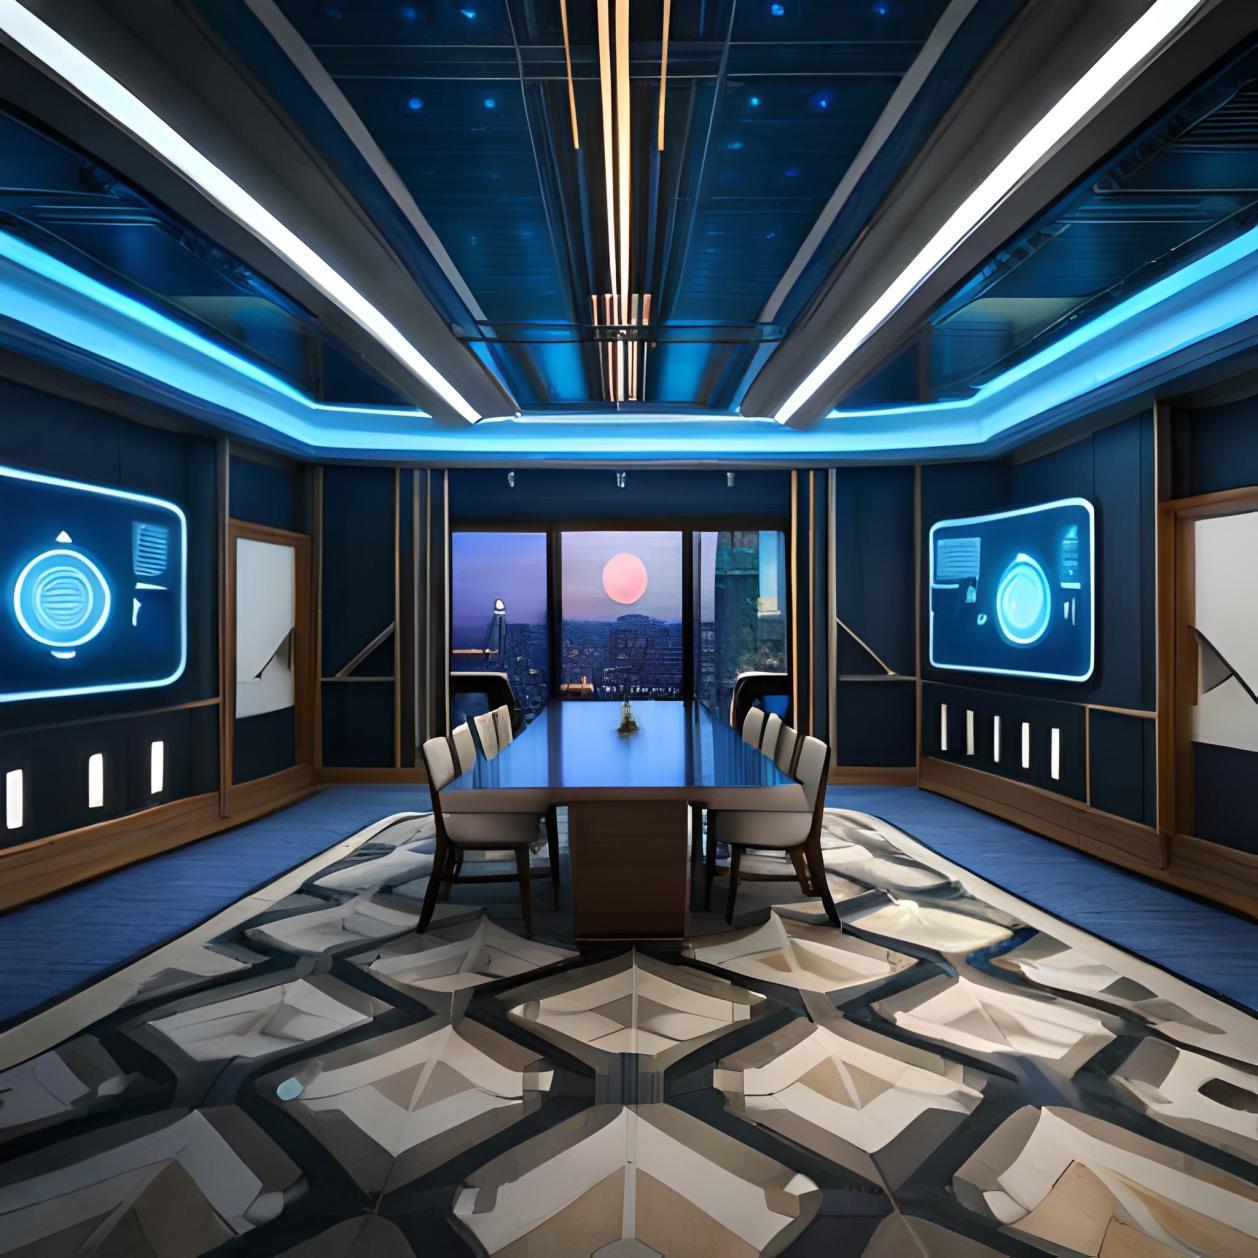 A vibrant, futuristic virtual reality escape room set in a sprawling high-tech cityscape. The room should be filled with intricate puzzles, high-tech gadgets, and immersive game elements. The walls should be adorned with holographic displays, showcasing mysterious symbols and clues. The ceiling should be adorned with a realistic starry night sky, giving the impression of being outdoors. The floor should have a sleek, glossy finish that reflects the city lights, adding to the futuristic atmosphere. The room should have a sense of depth and scale, with multiple layers and hidden compartments. The lighting should be dynamic, with a mix of neon colors and subtle shadows, creating a visually stunning environment. The overall ambiance should be both captivating and challenging, leaving the player eager to explore and solve the puzzles within the virtual reality escape room.